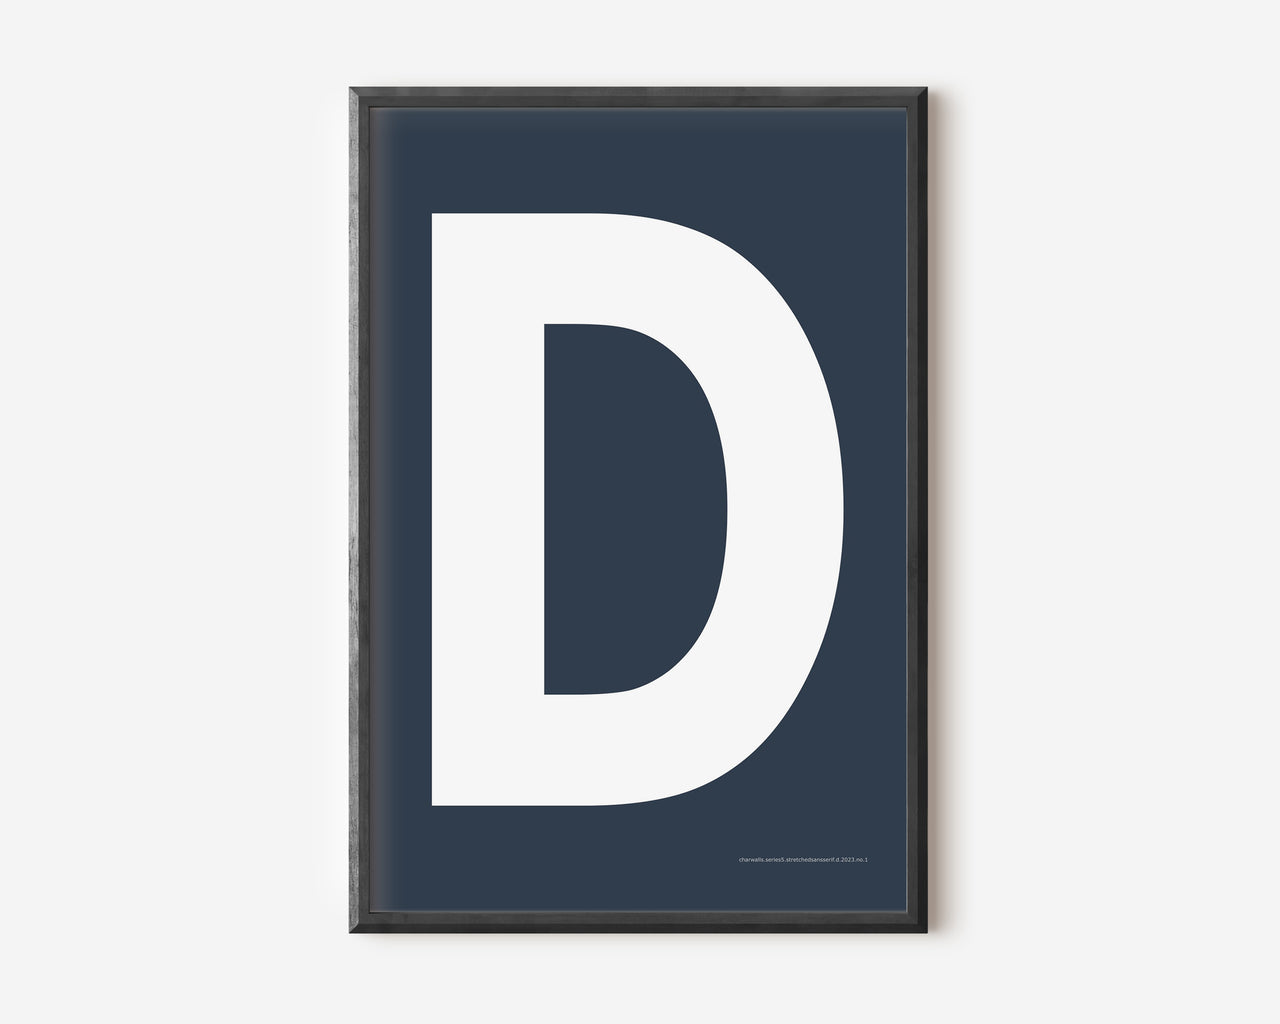 Modern art print with an uppercase white letter D on a navy blue background.